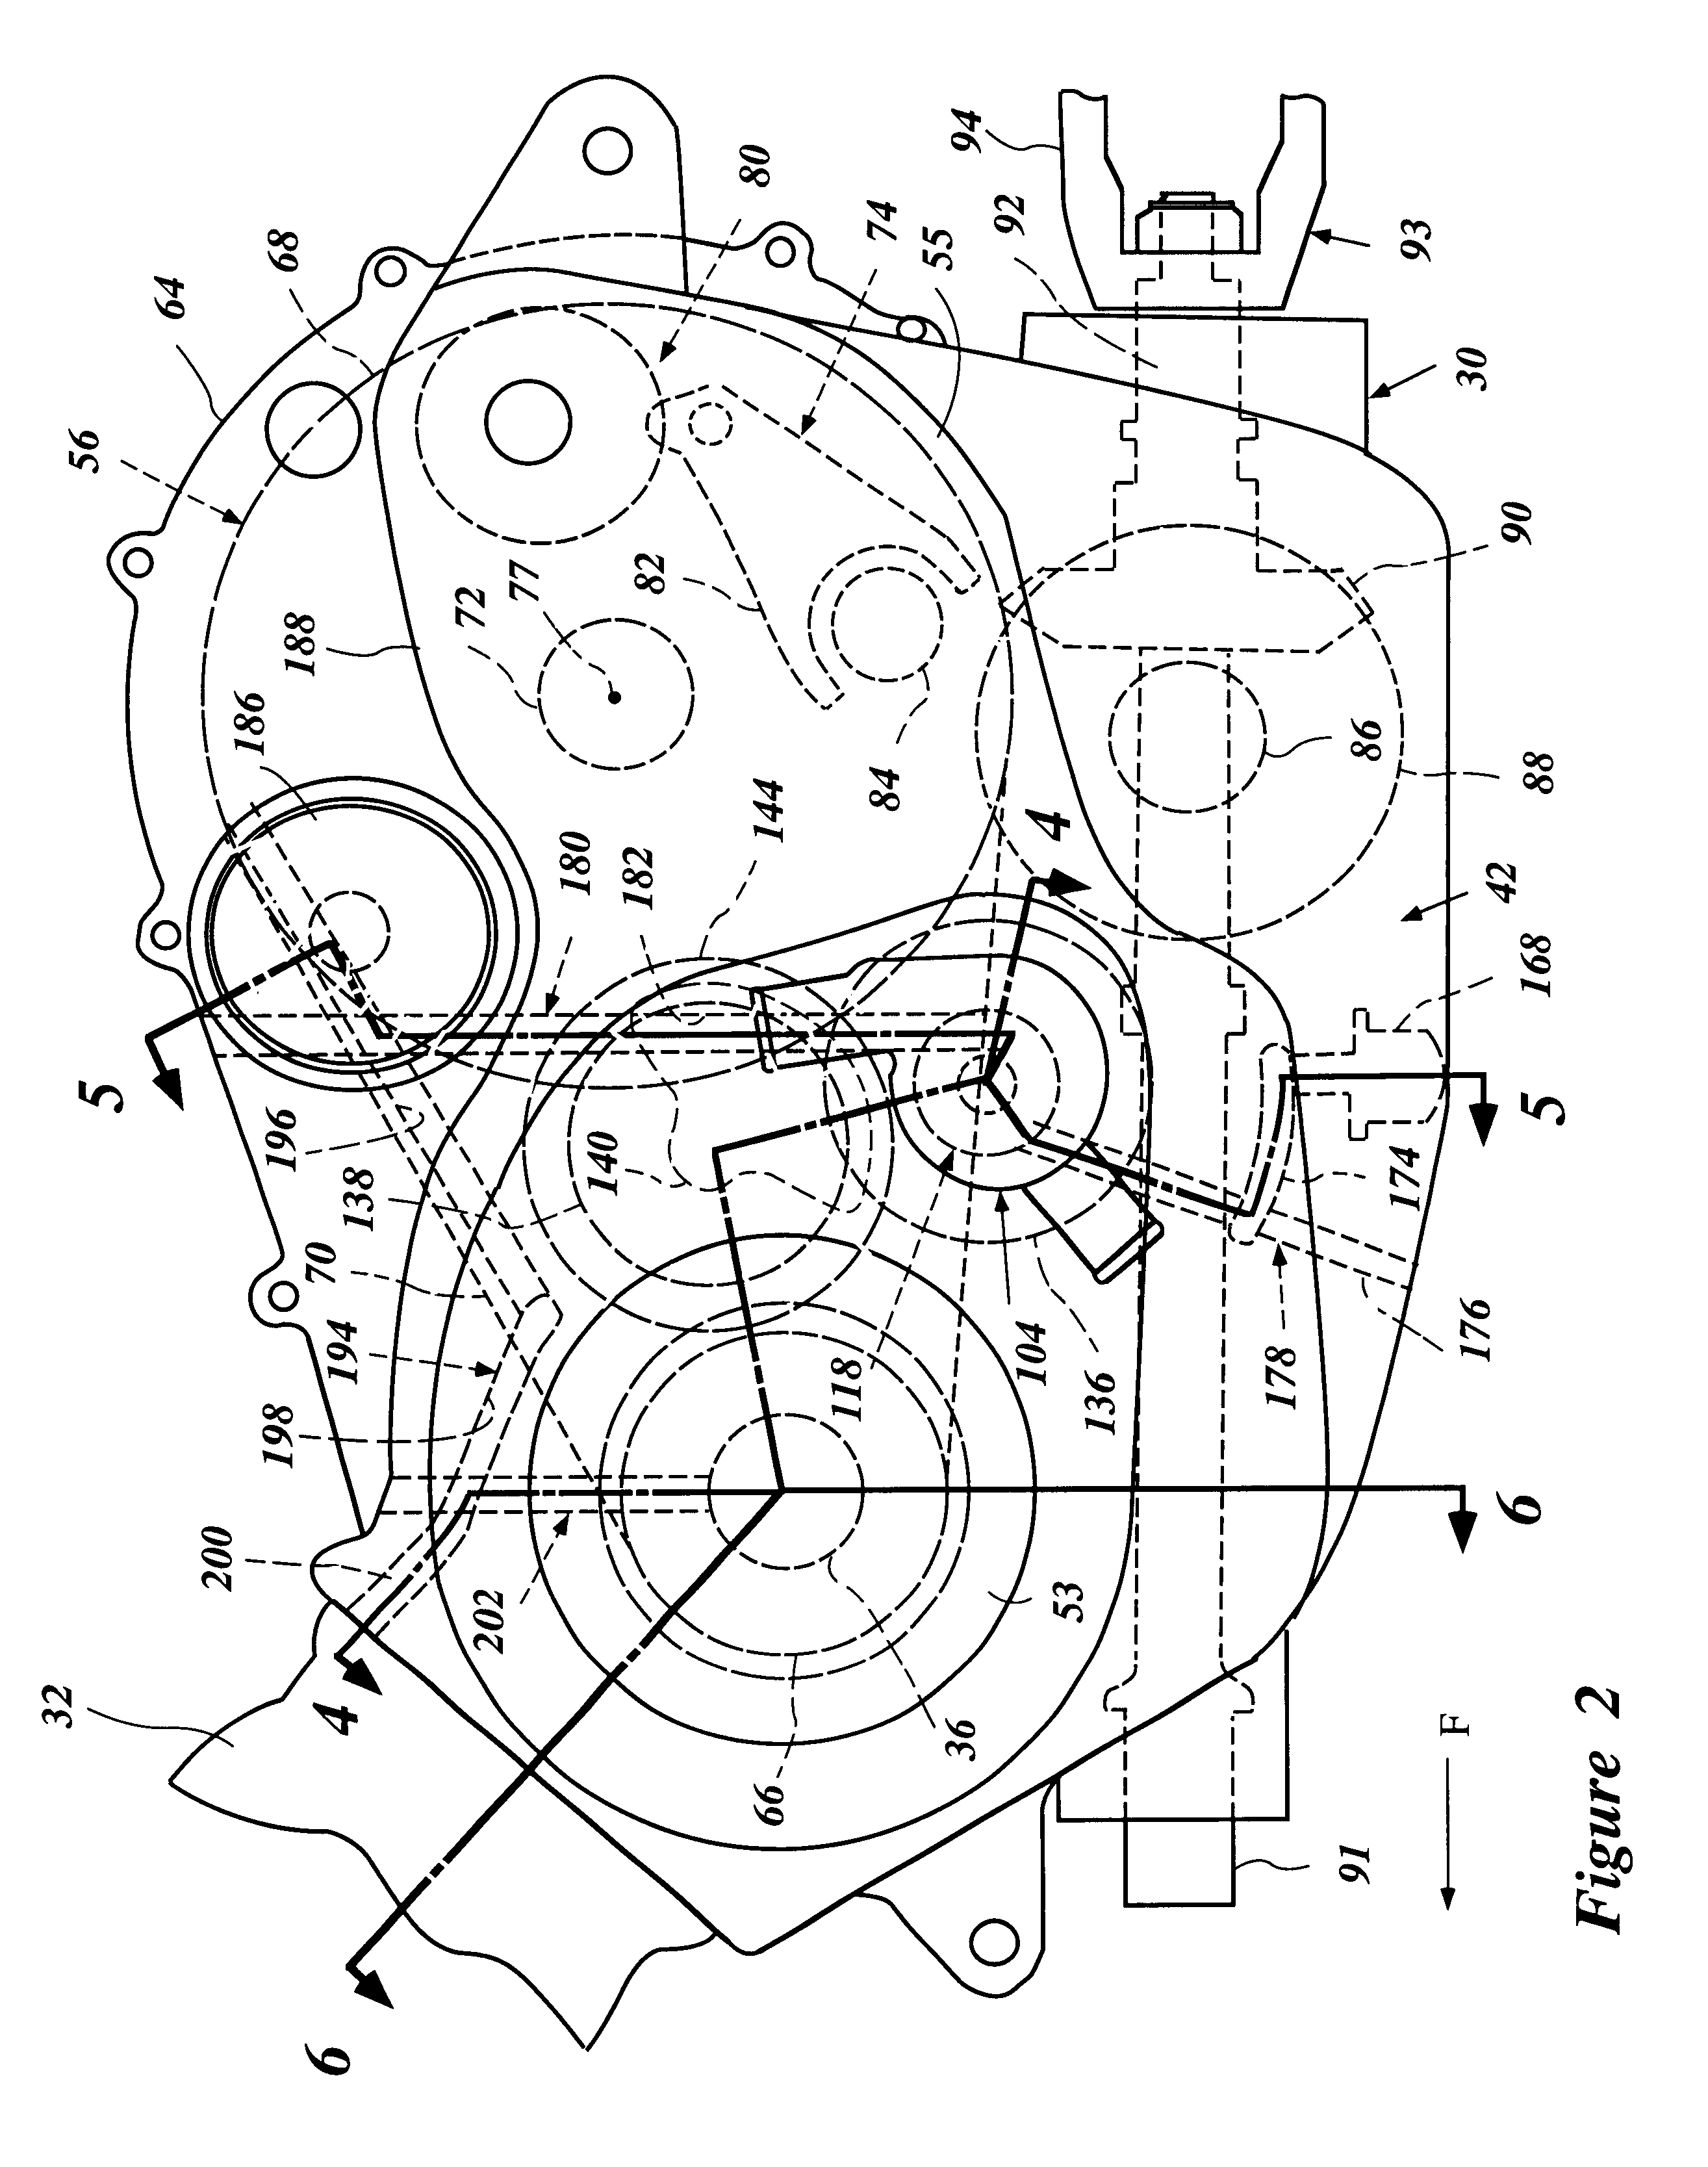 Transmission and cooling arrangement for all terrain vehicle